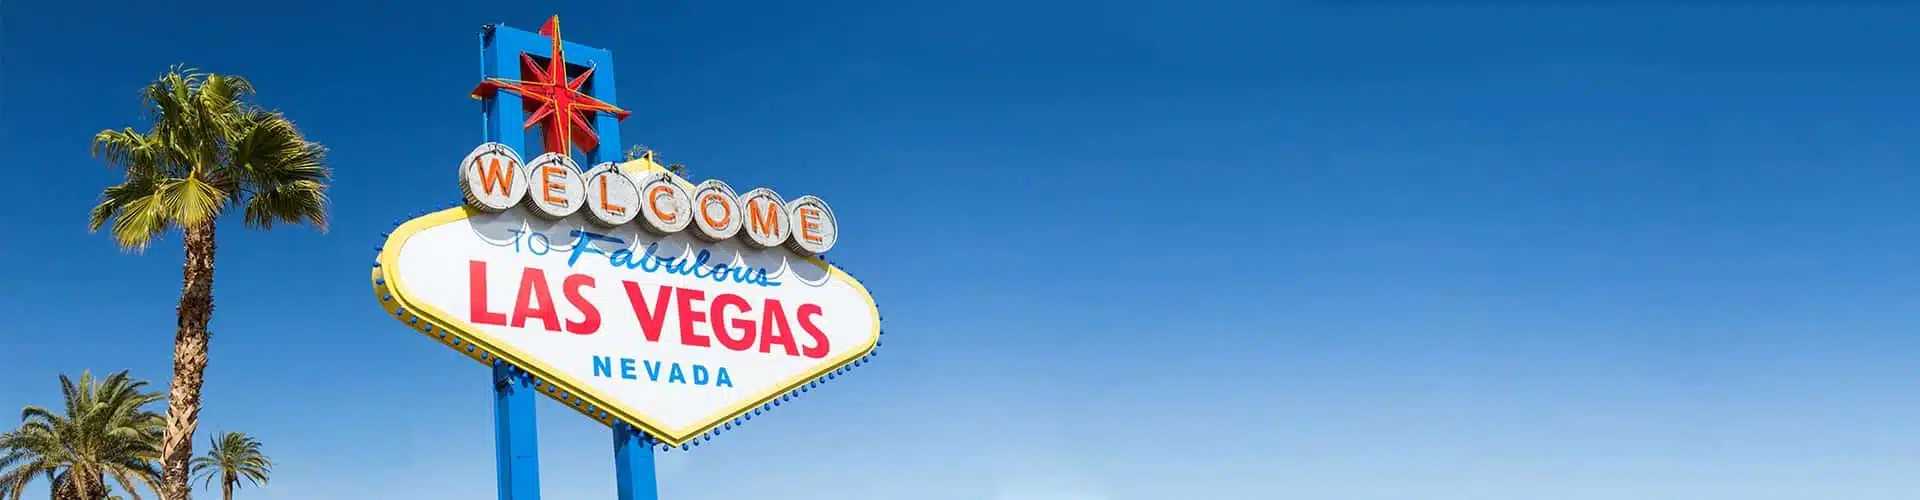 Las Vegas sign in USA with Palmtree and blue sky